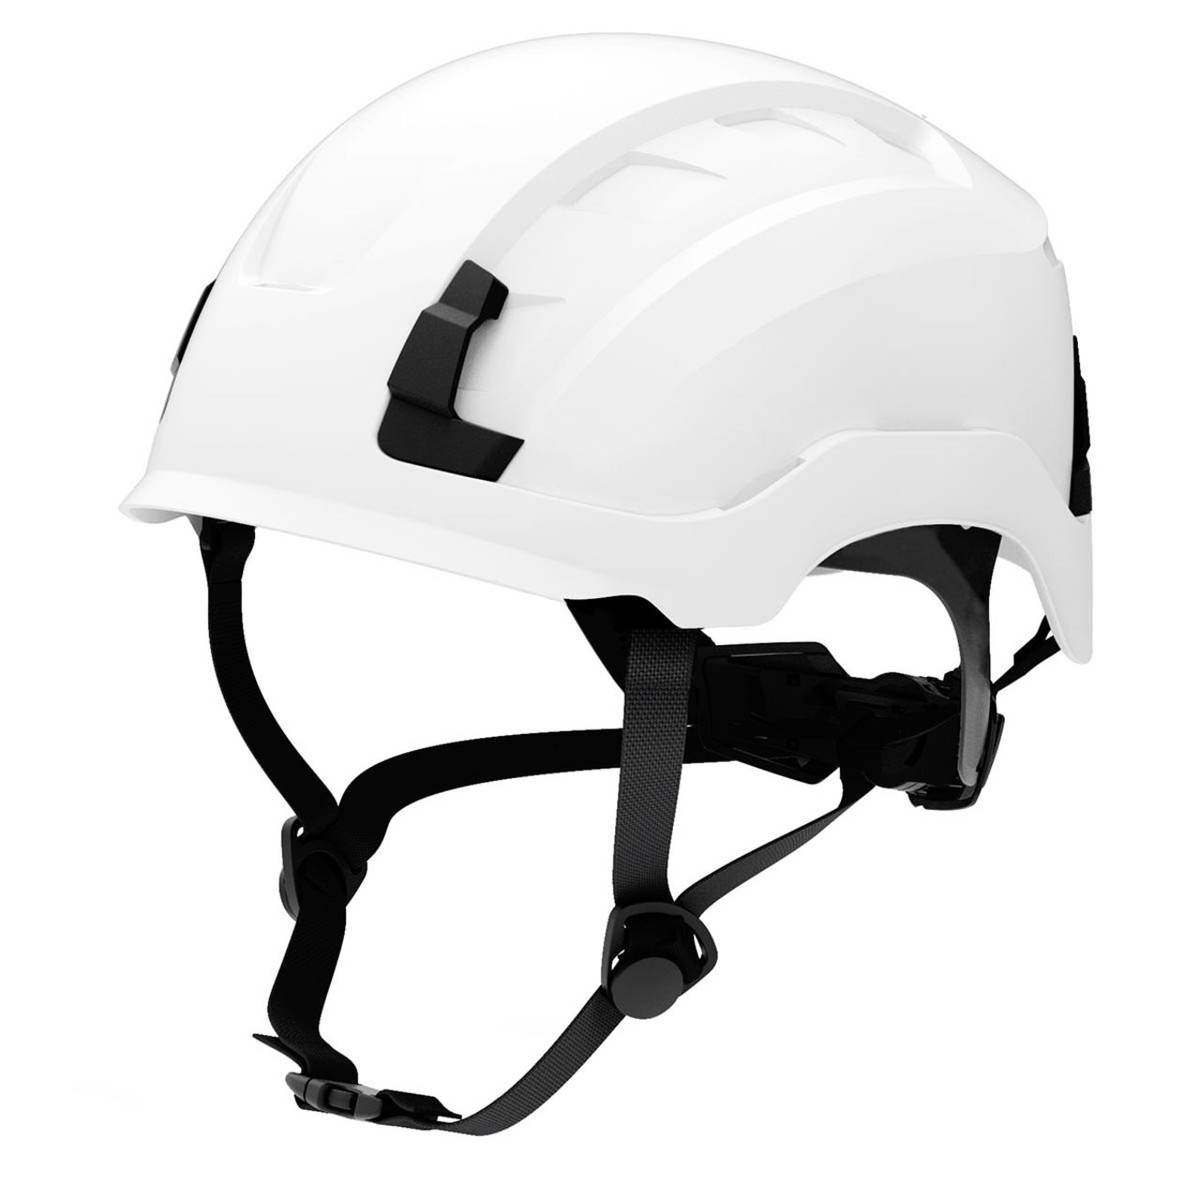 General Electric Type Non-Vented Safety Helmet GH401